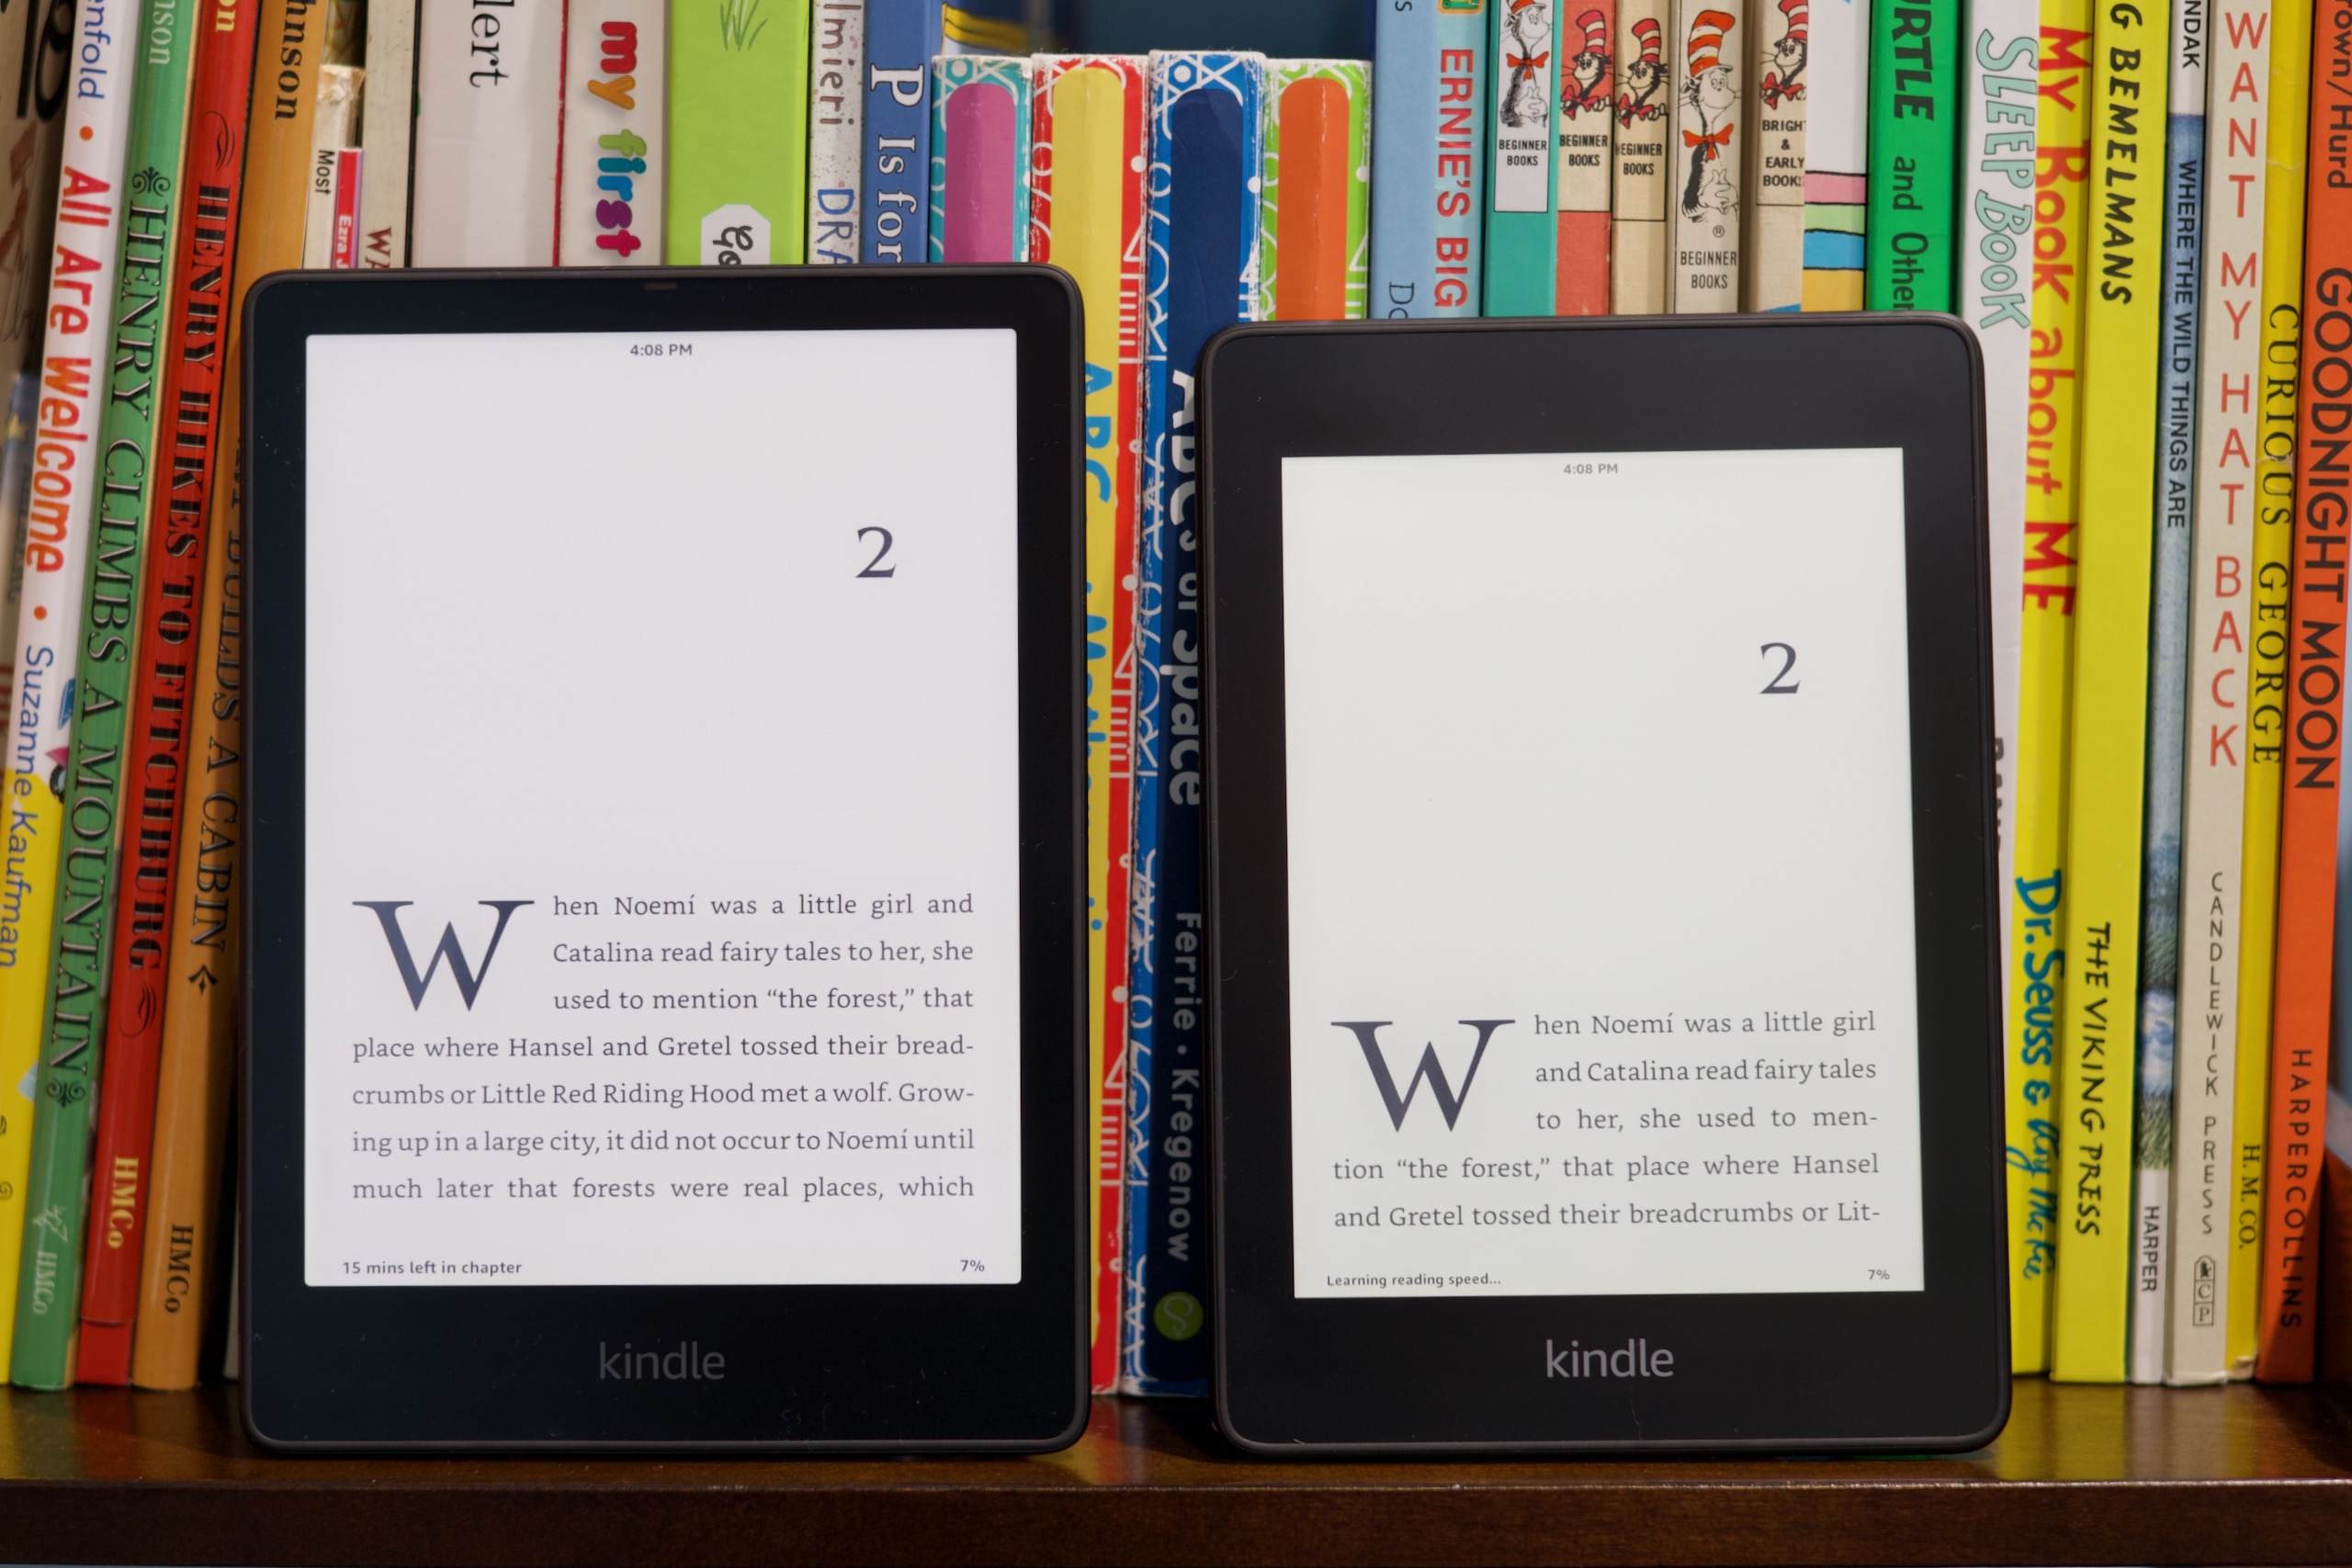 The new Paperwhite (left) has a 6.8-inch display, which looks and feels much larger than the older model's 6-inch screen (right).